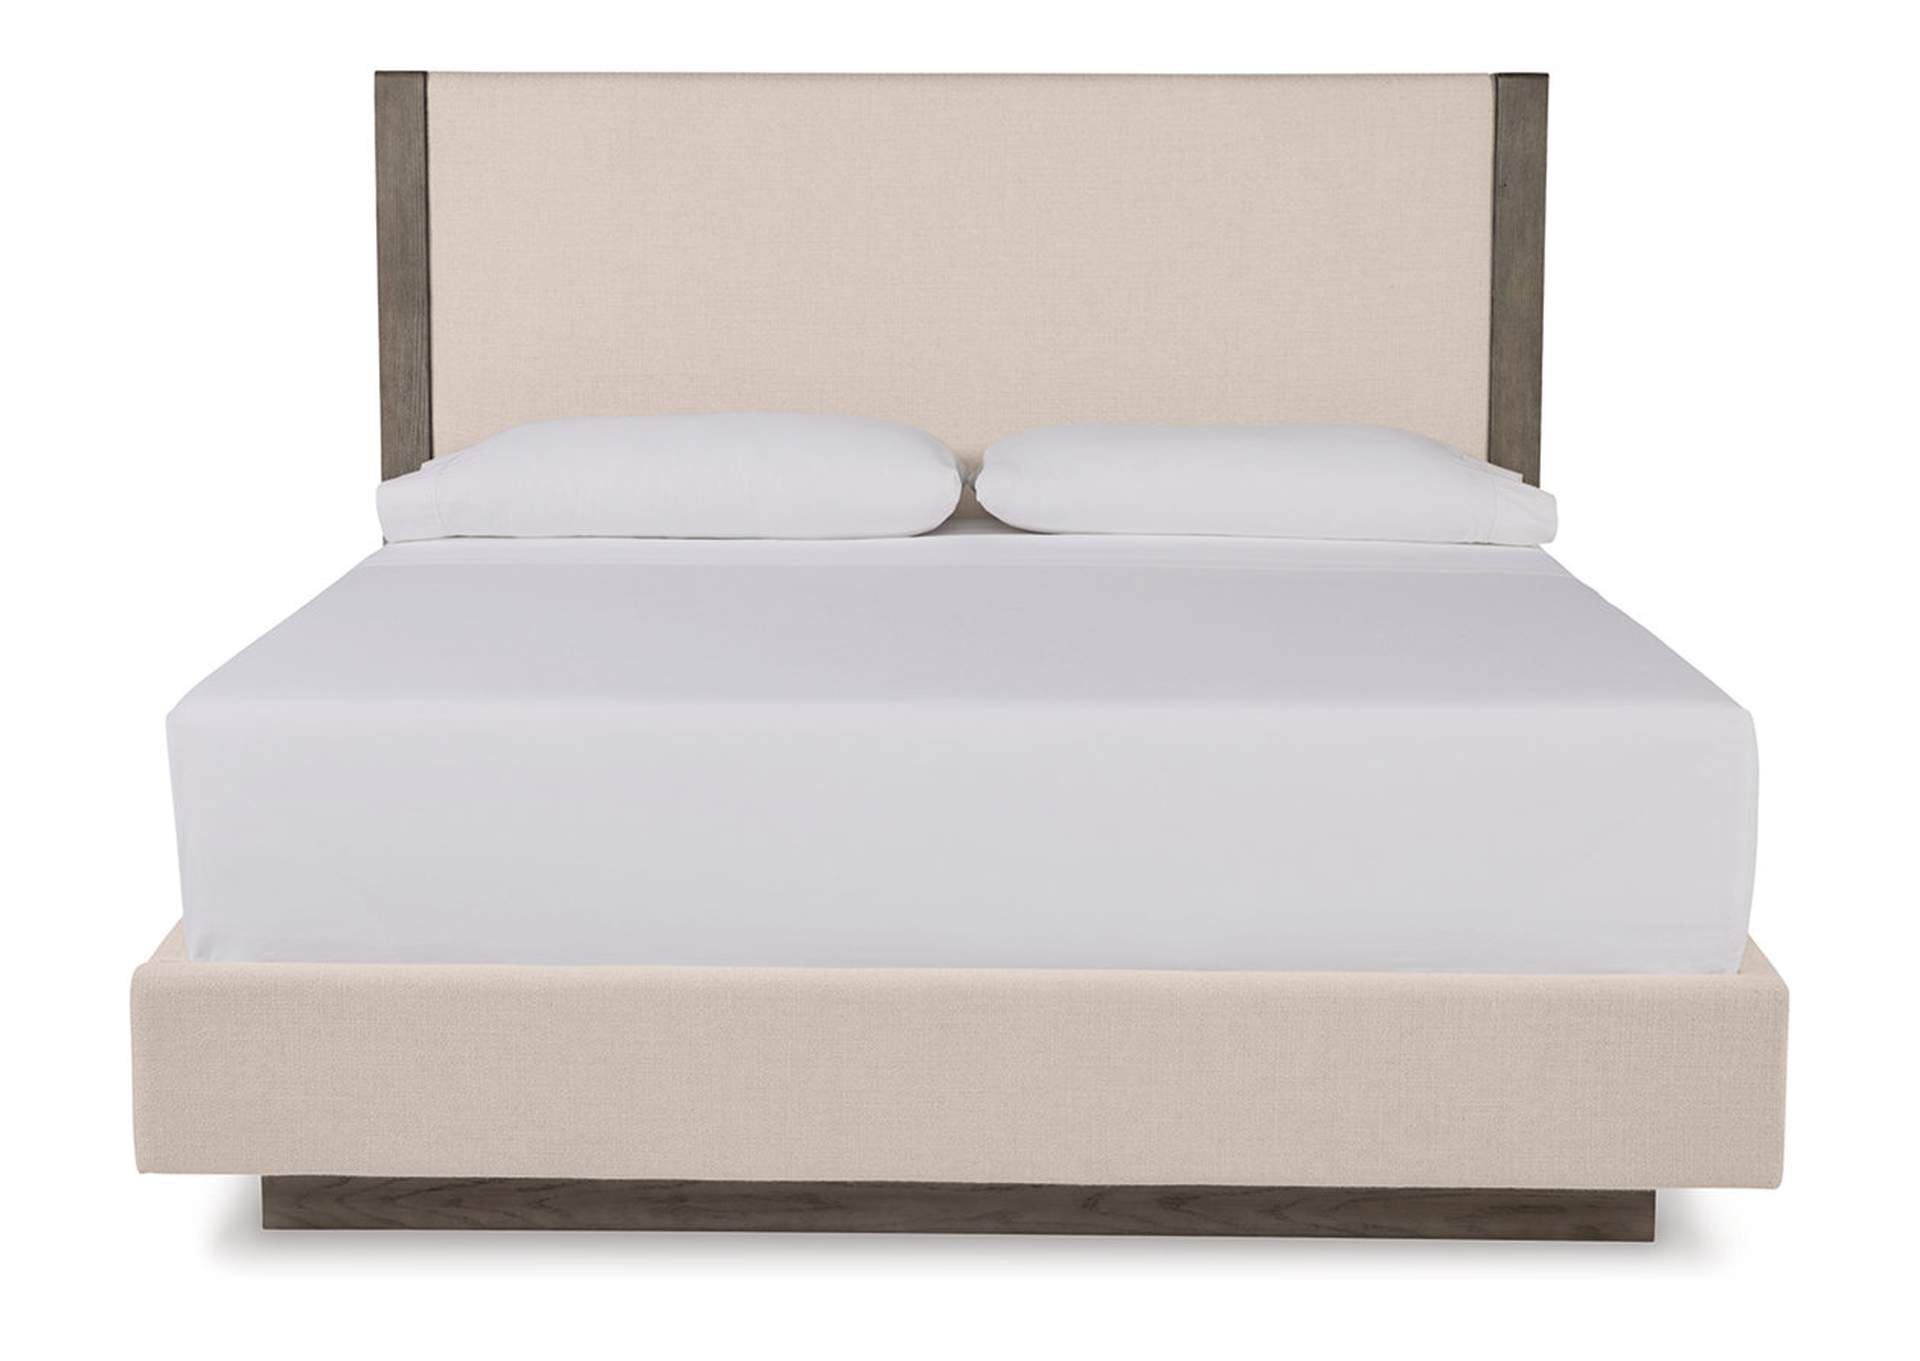 Anibecca Queen Upholstered Panel Bed,Benchcraft